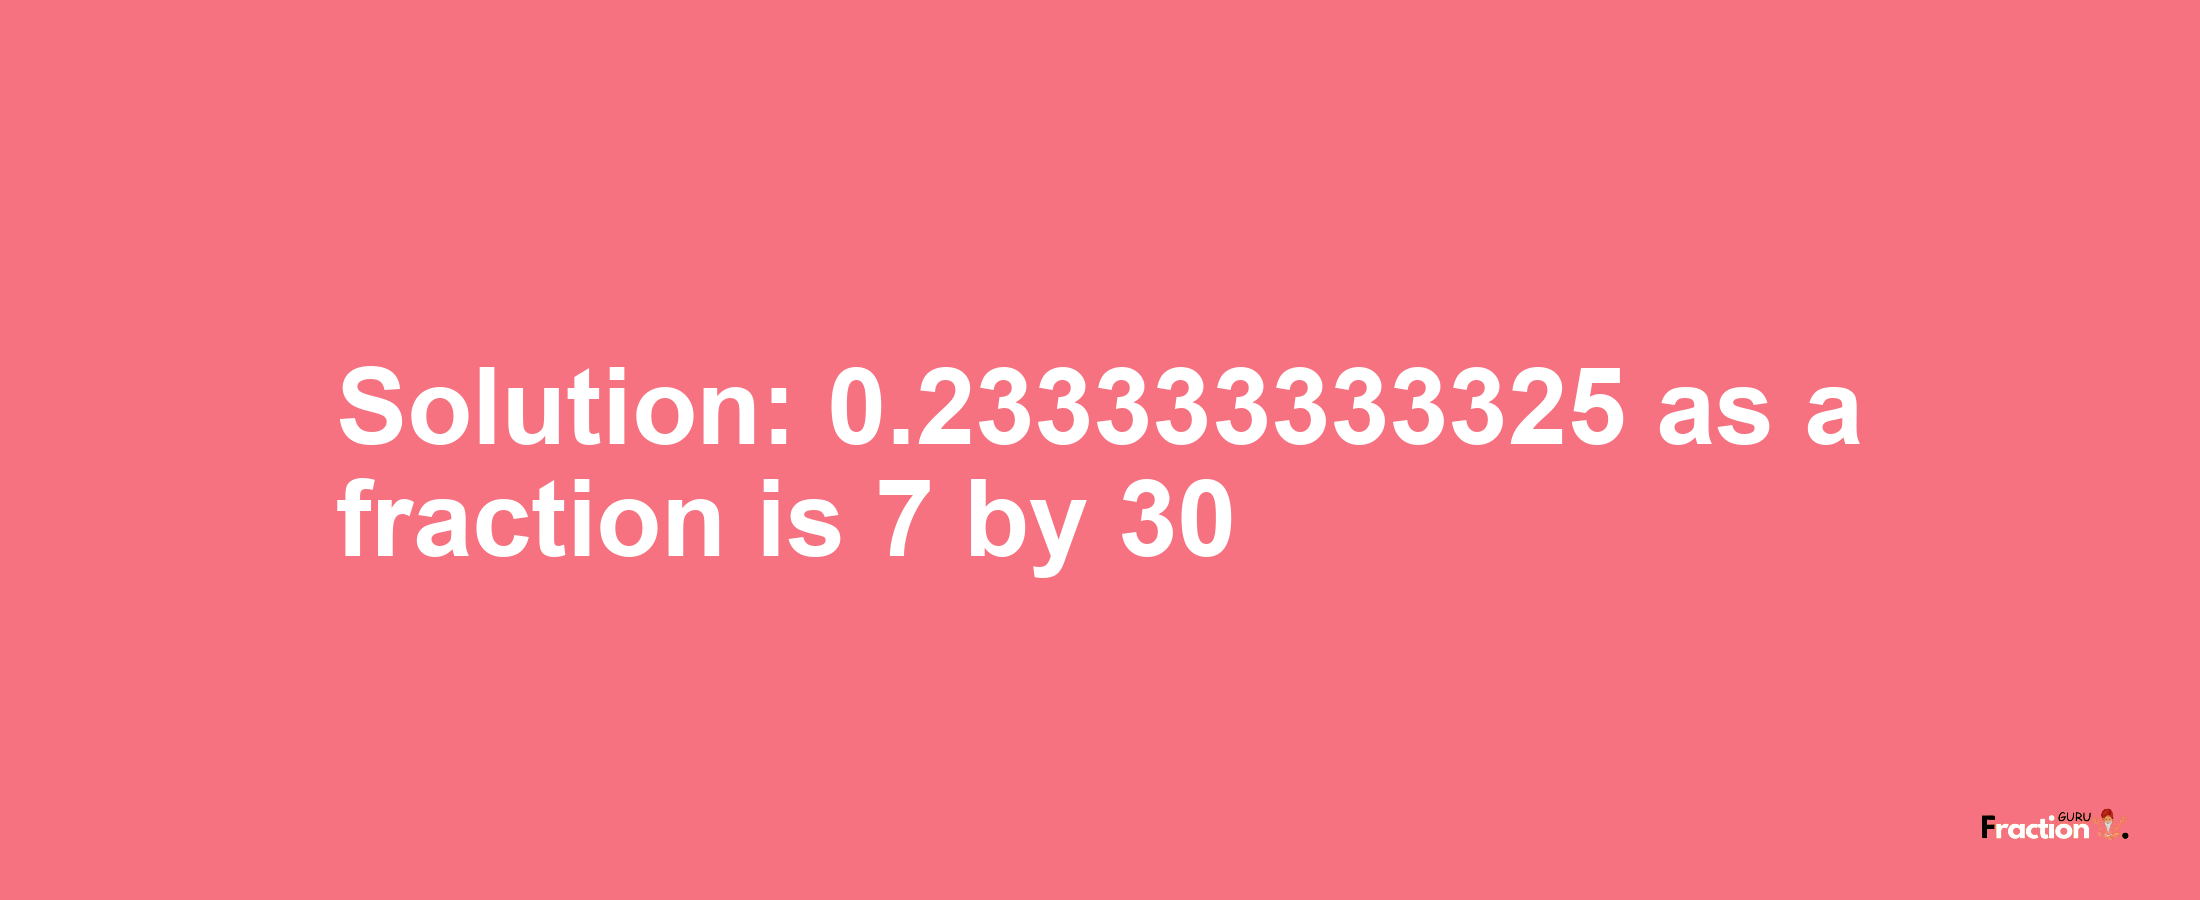 Solution:0.233333333325 as a fraction is 7/30